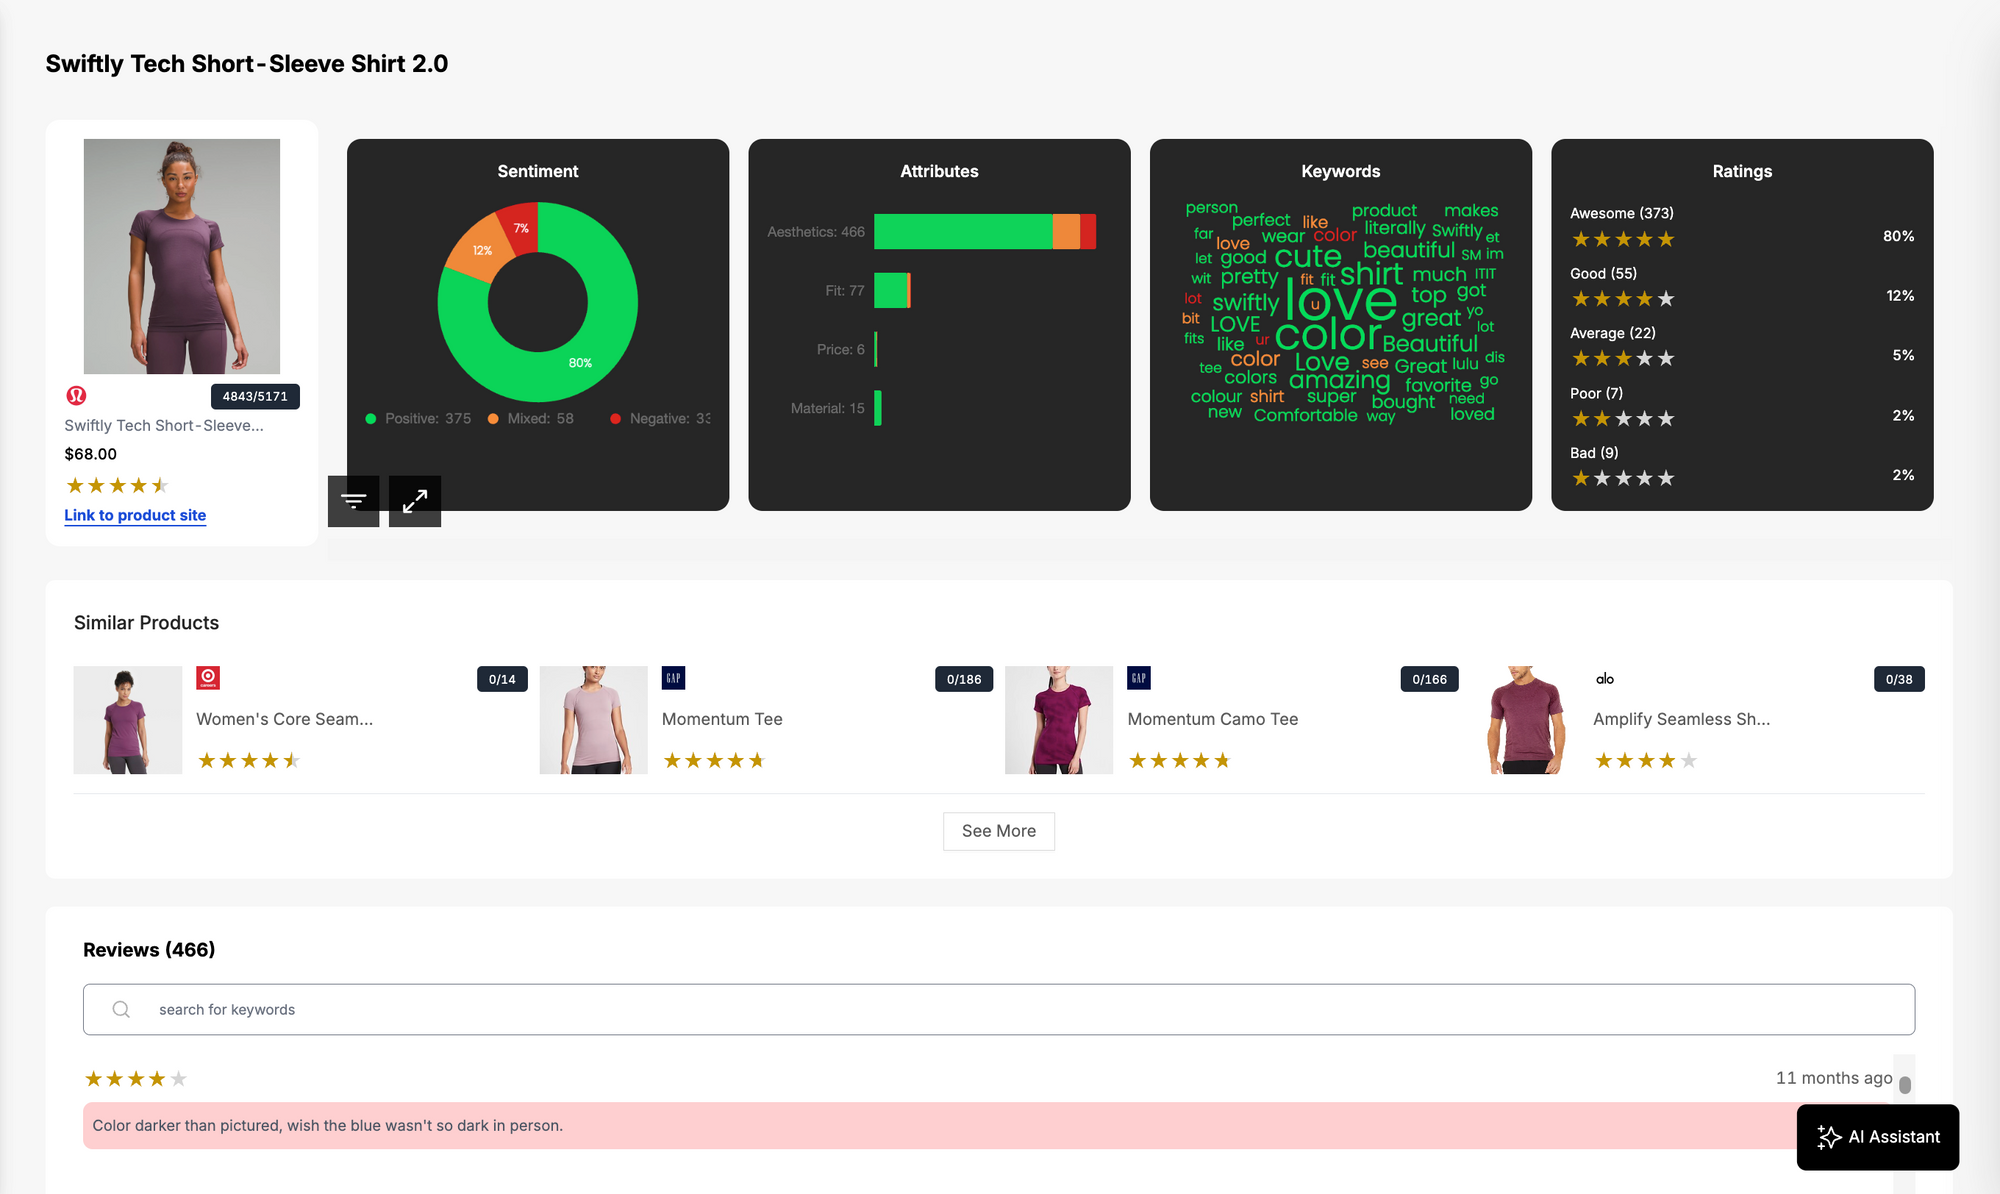 Woven Insights' consumer insights dashboard, showing insights into the aesthetic attributes of a shirt, based on AI-powered analysis of customer reviews about the shirt.